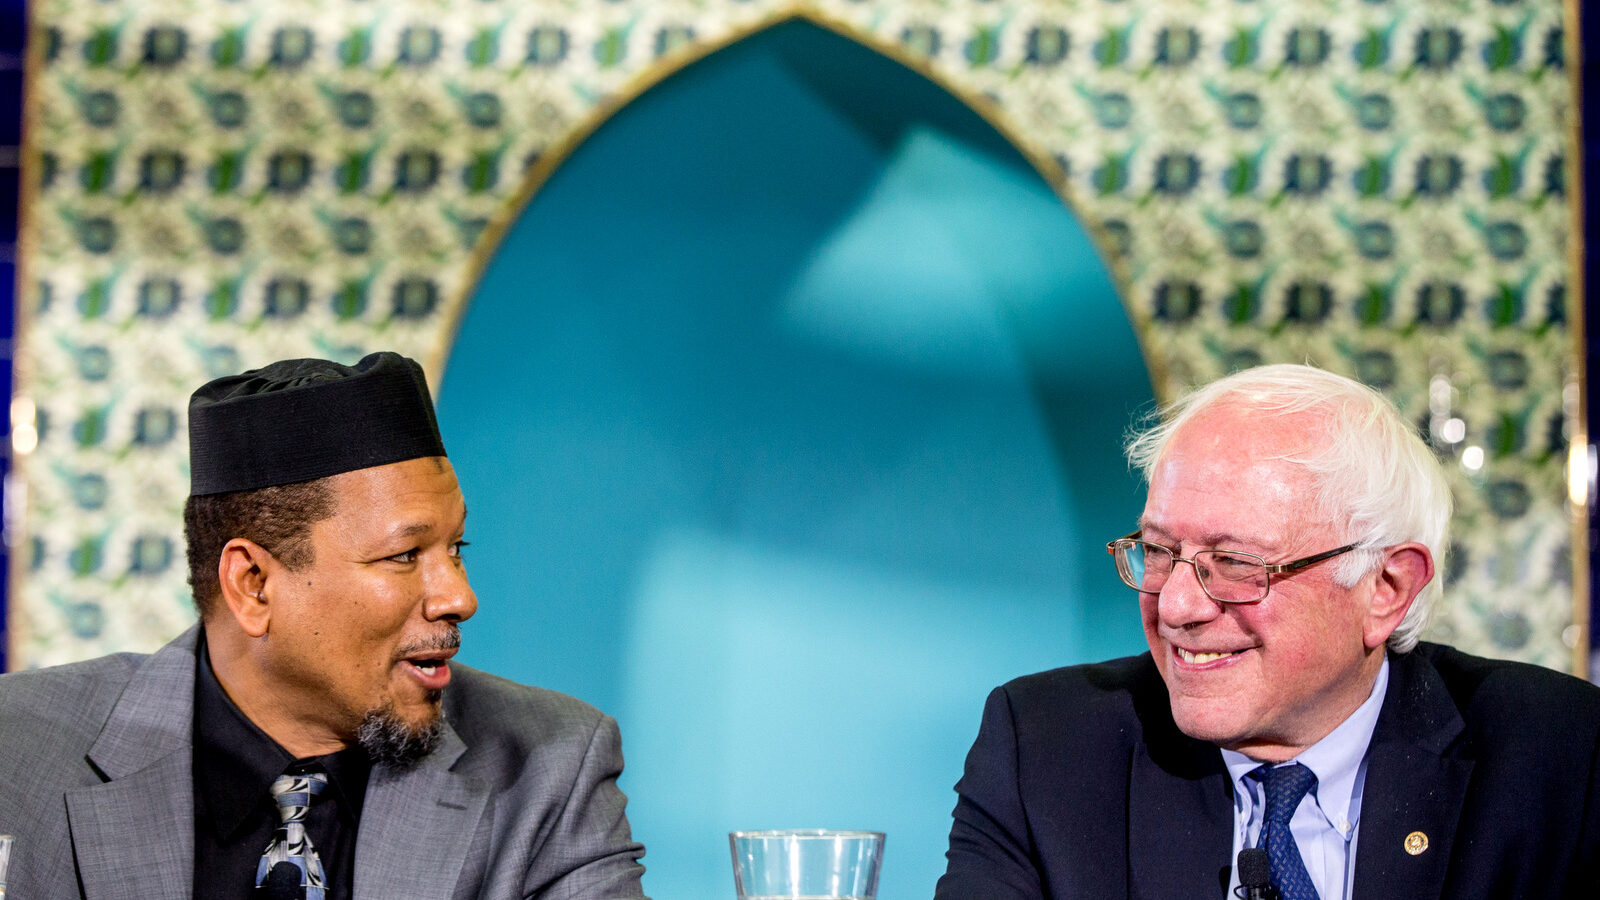 Democratic presidential candidate Sen. Bernie Sanders, I-Vt. listens as Imam Talib Shareef speaks during an interfaith roundtable hosted by at Masjid Muhammad, the Nation's Mosque in Washington, Wednesday, Dec. 16, 2015, for a discussion on standing up to anti-Muslim rhetoric. (AP Photo/Andrew Harnik)